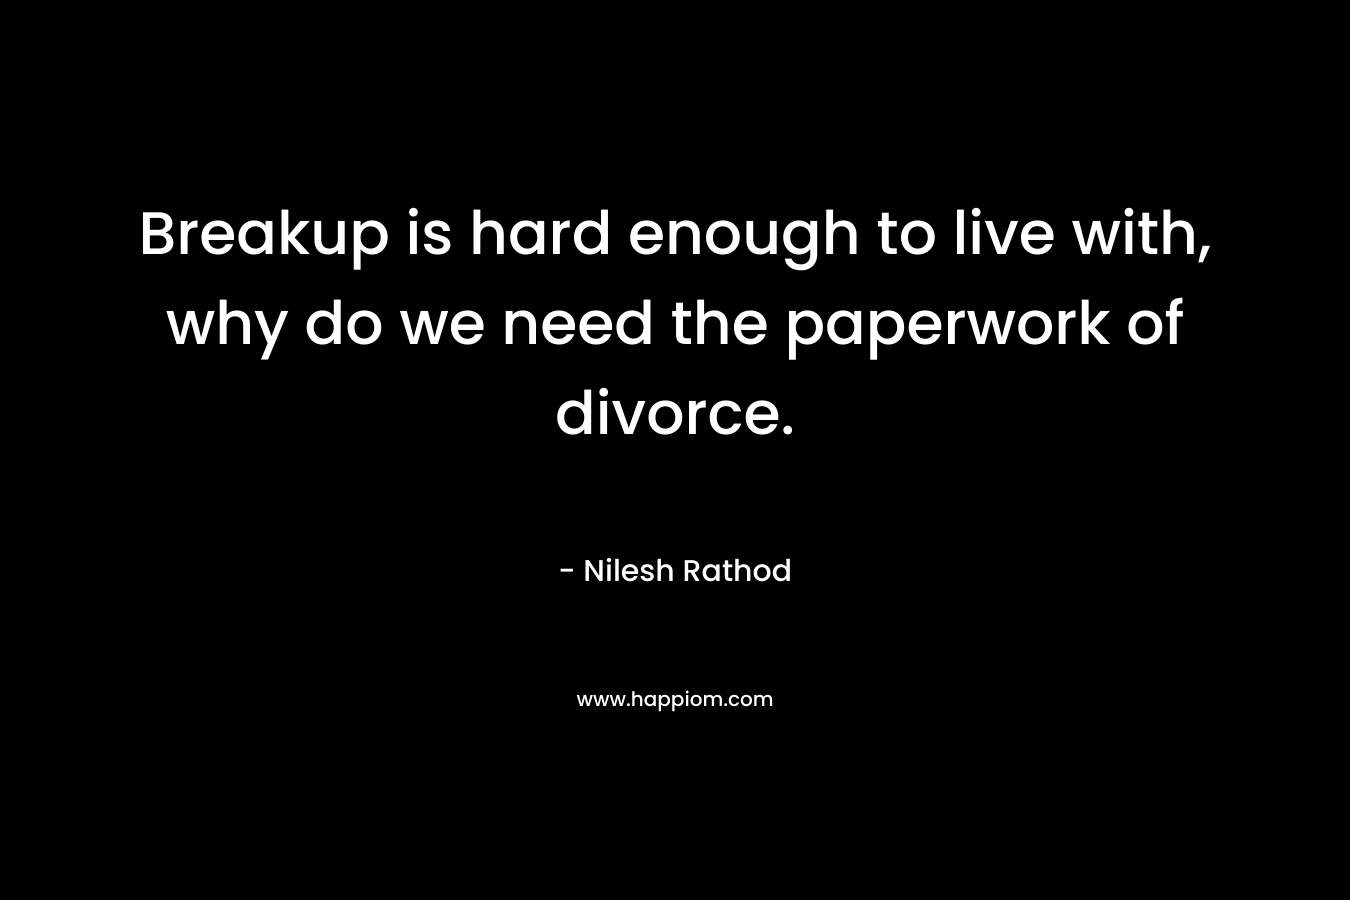 Breakup is hard enough to live with, why do we need the paperwork of divorce. – Nilesh Rathod